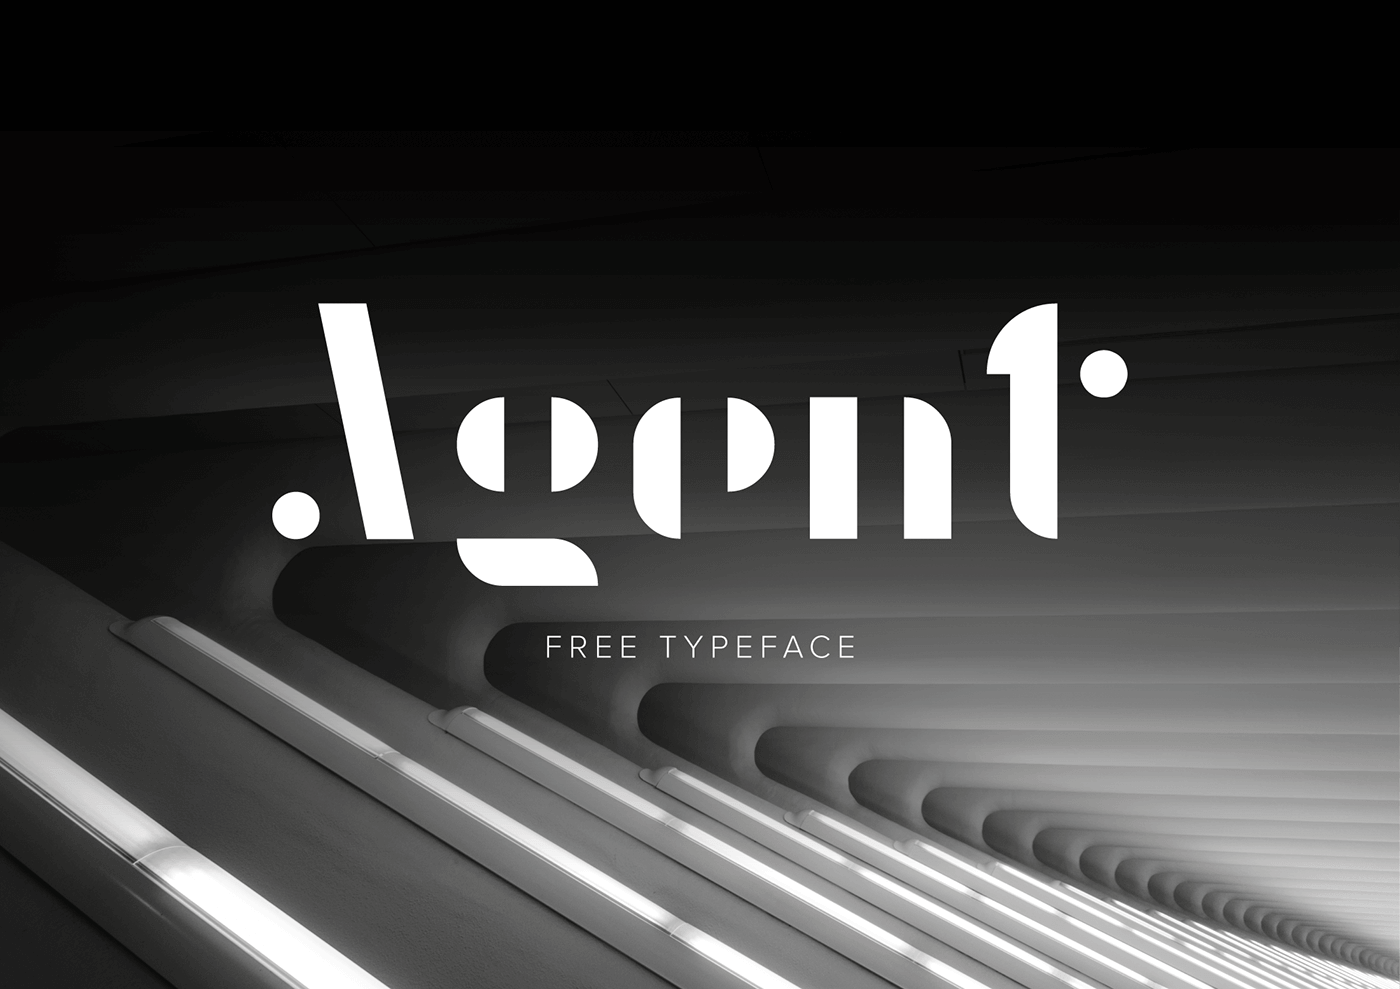 agent font - Agent Typeface Free Download